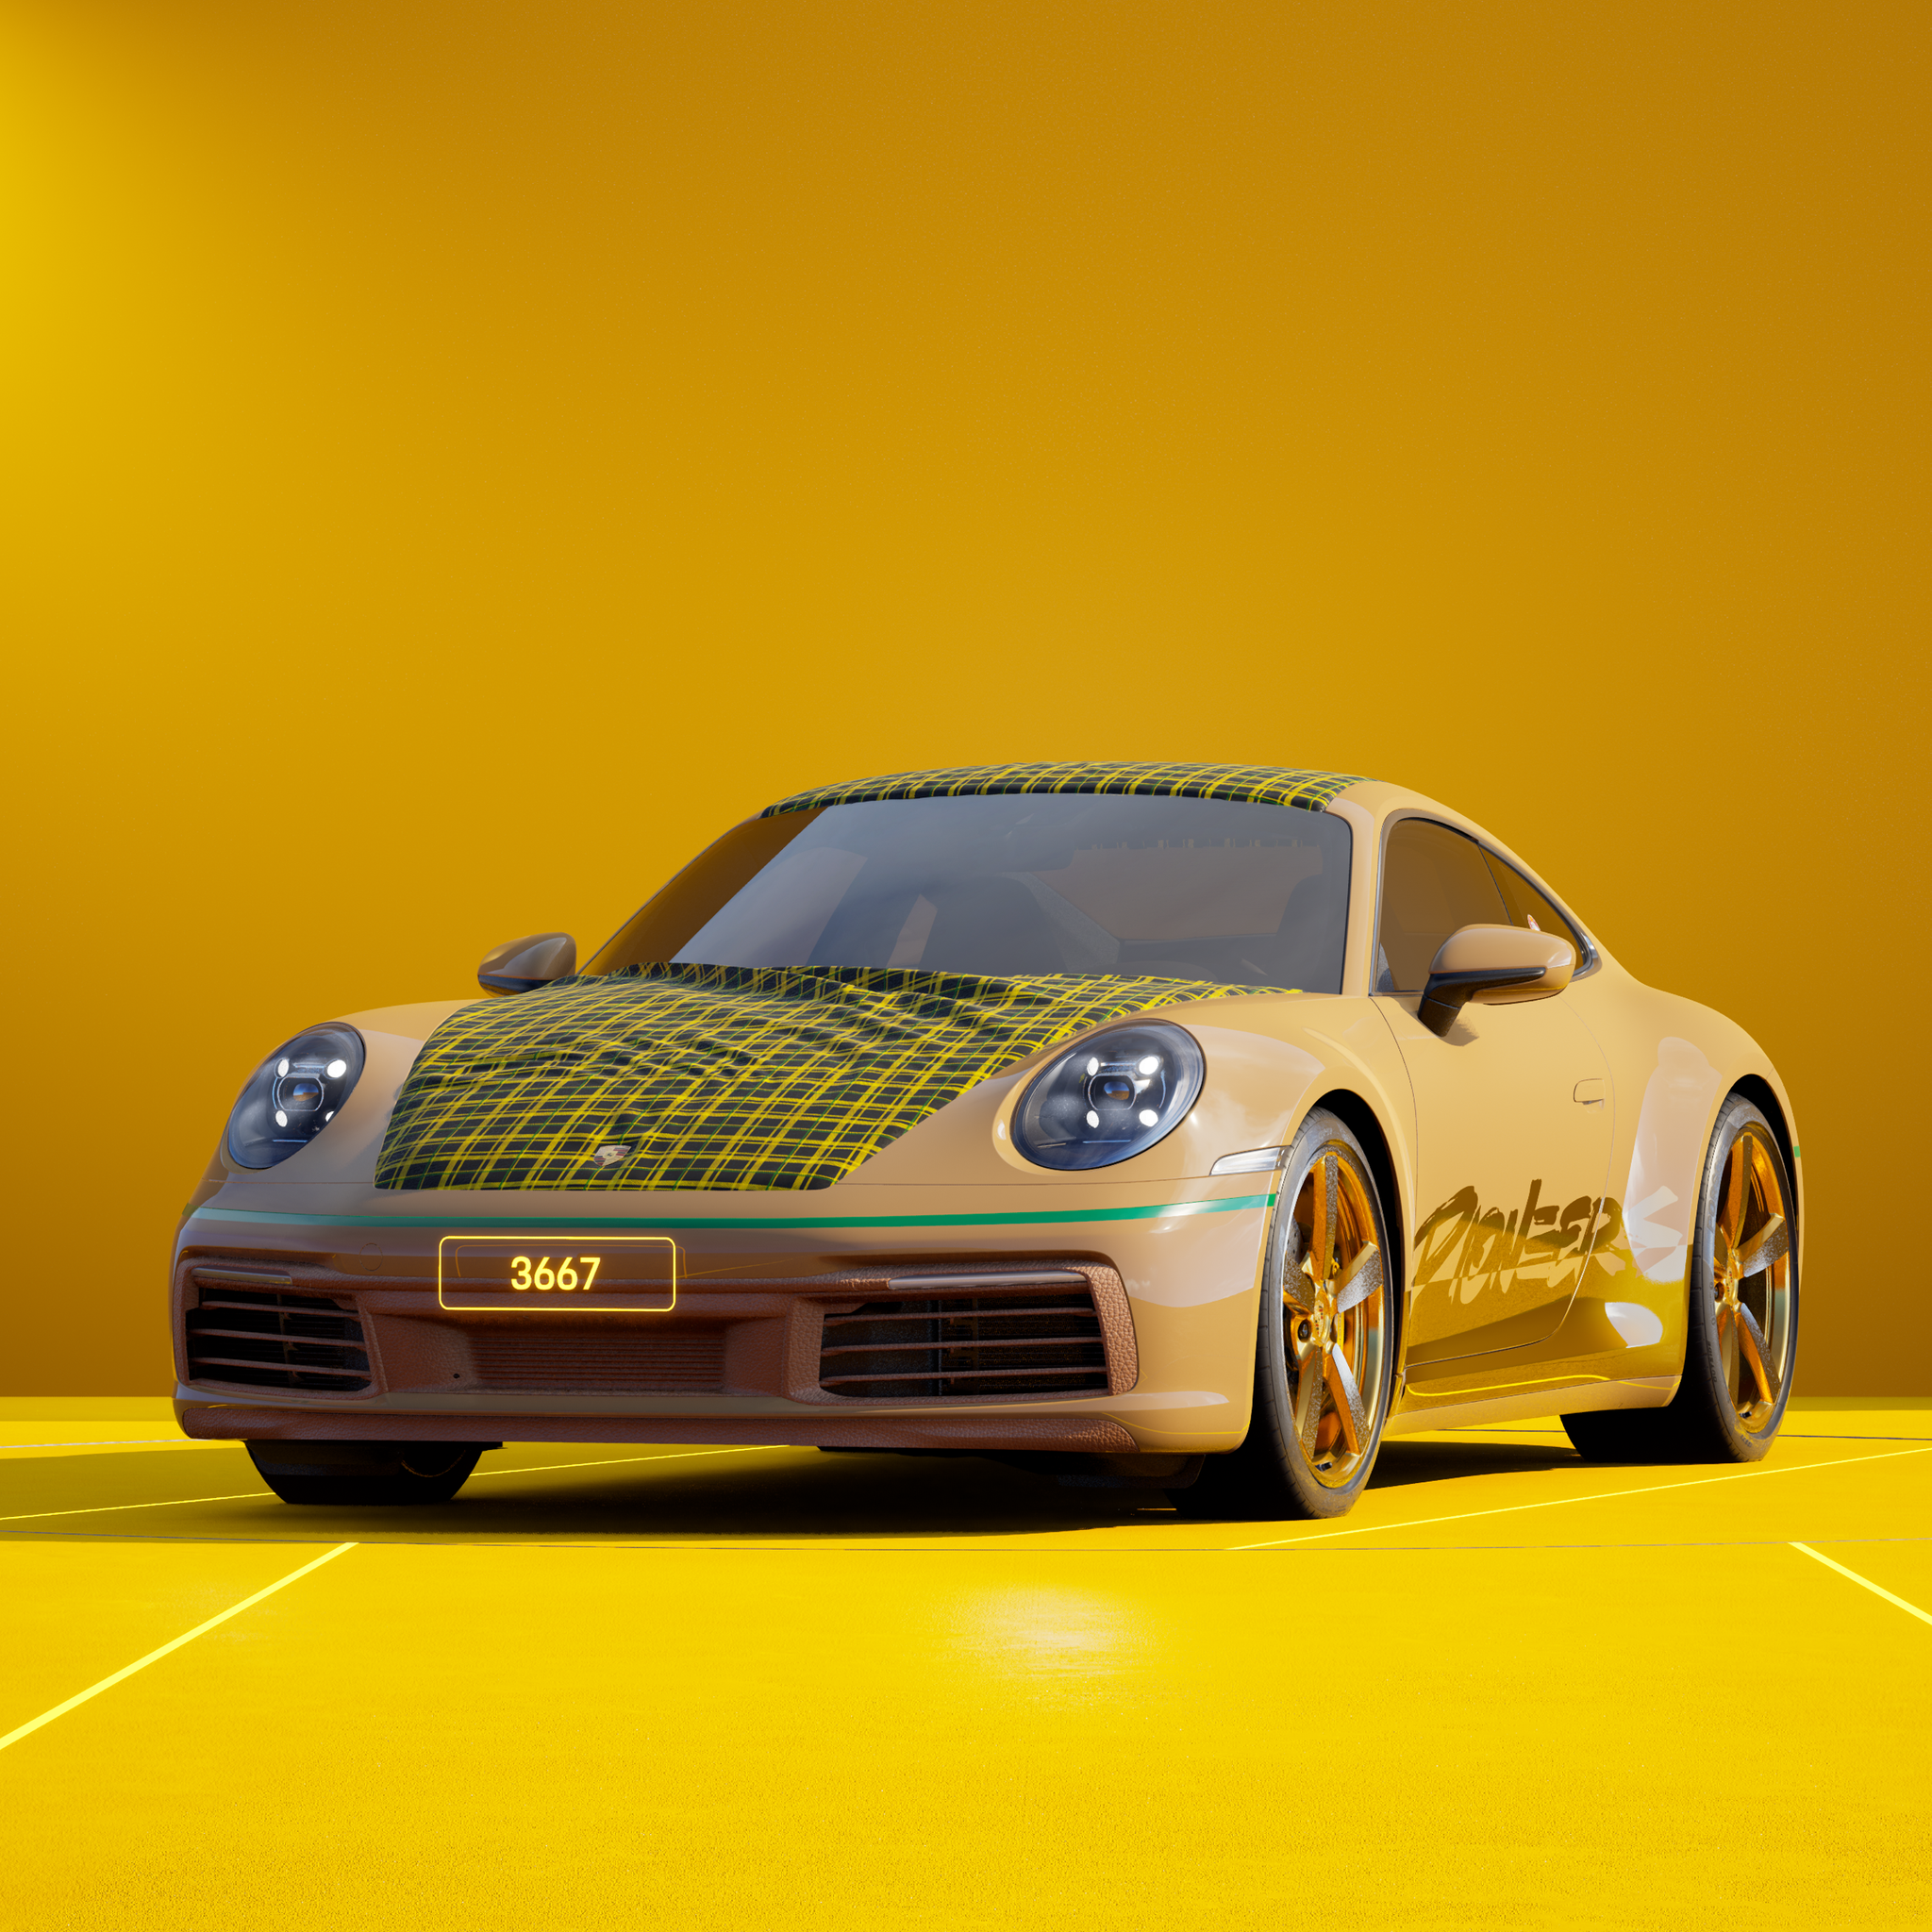 The PORSCHΞ 911 3667 image in phase